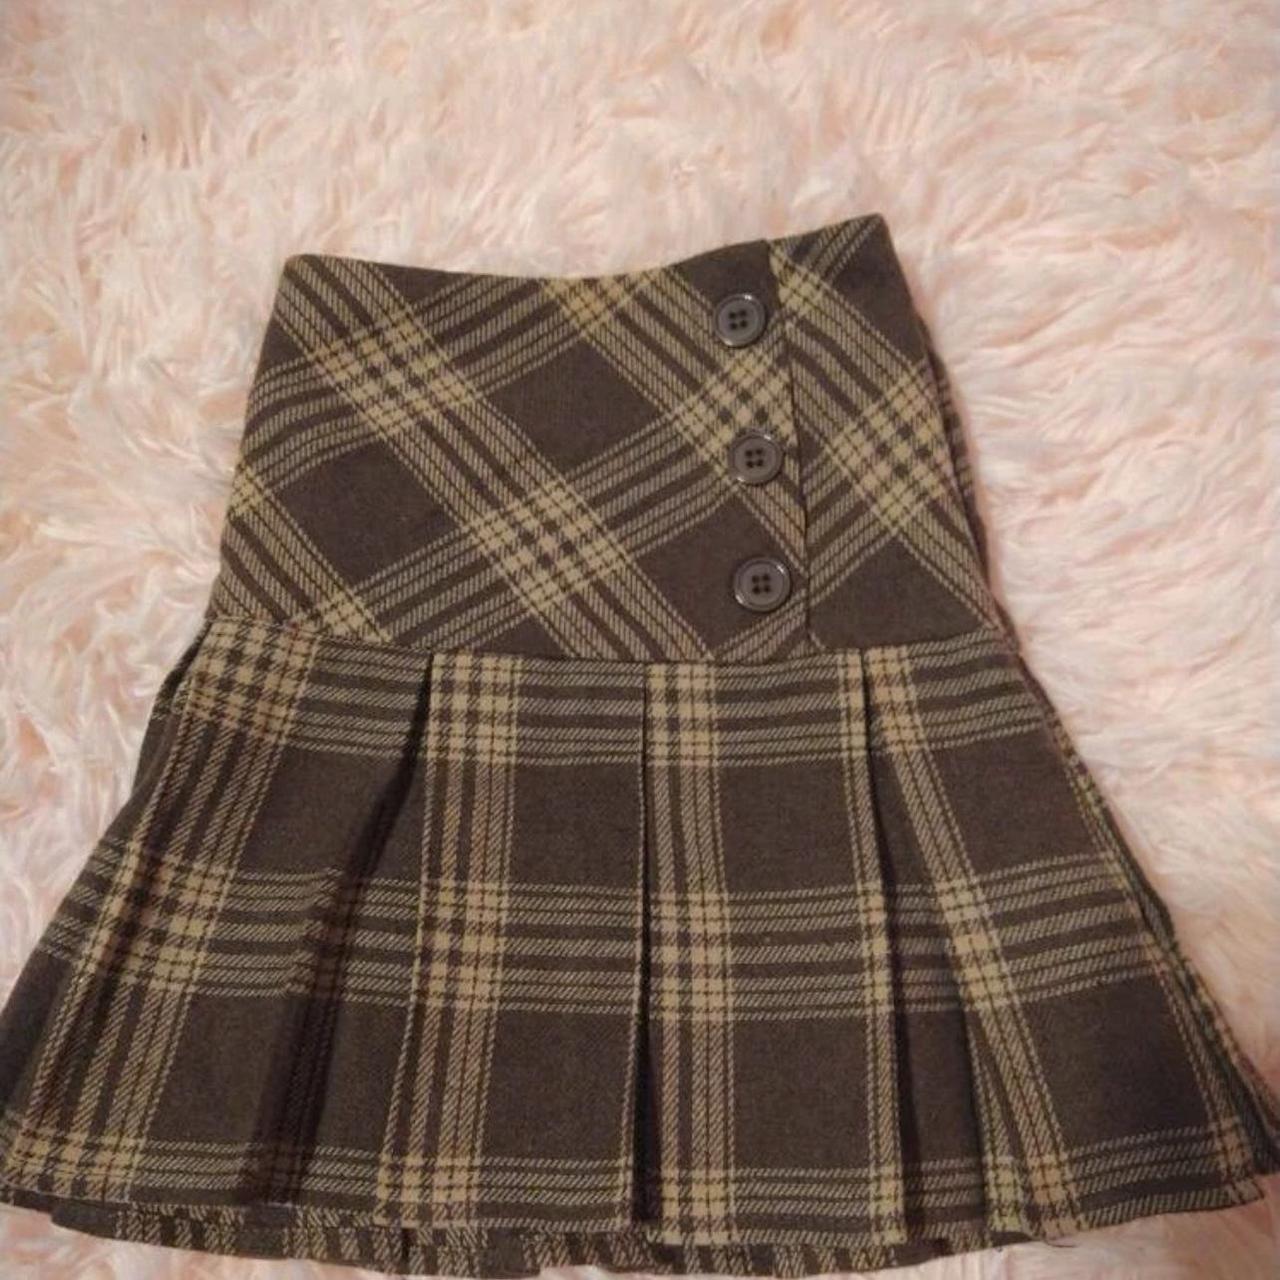 Plaid school girl mini skirt with attached shorts - Depop